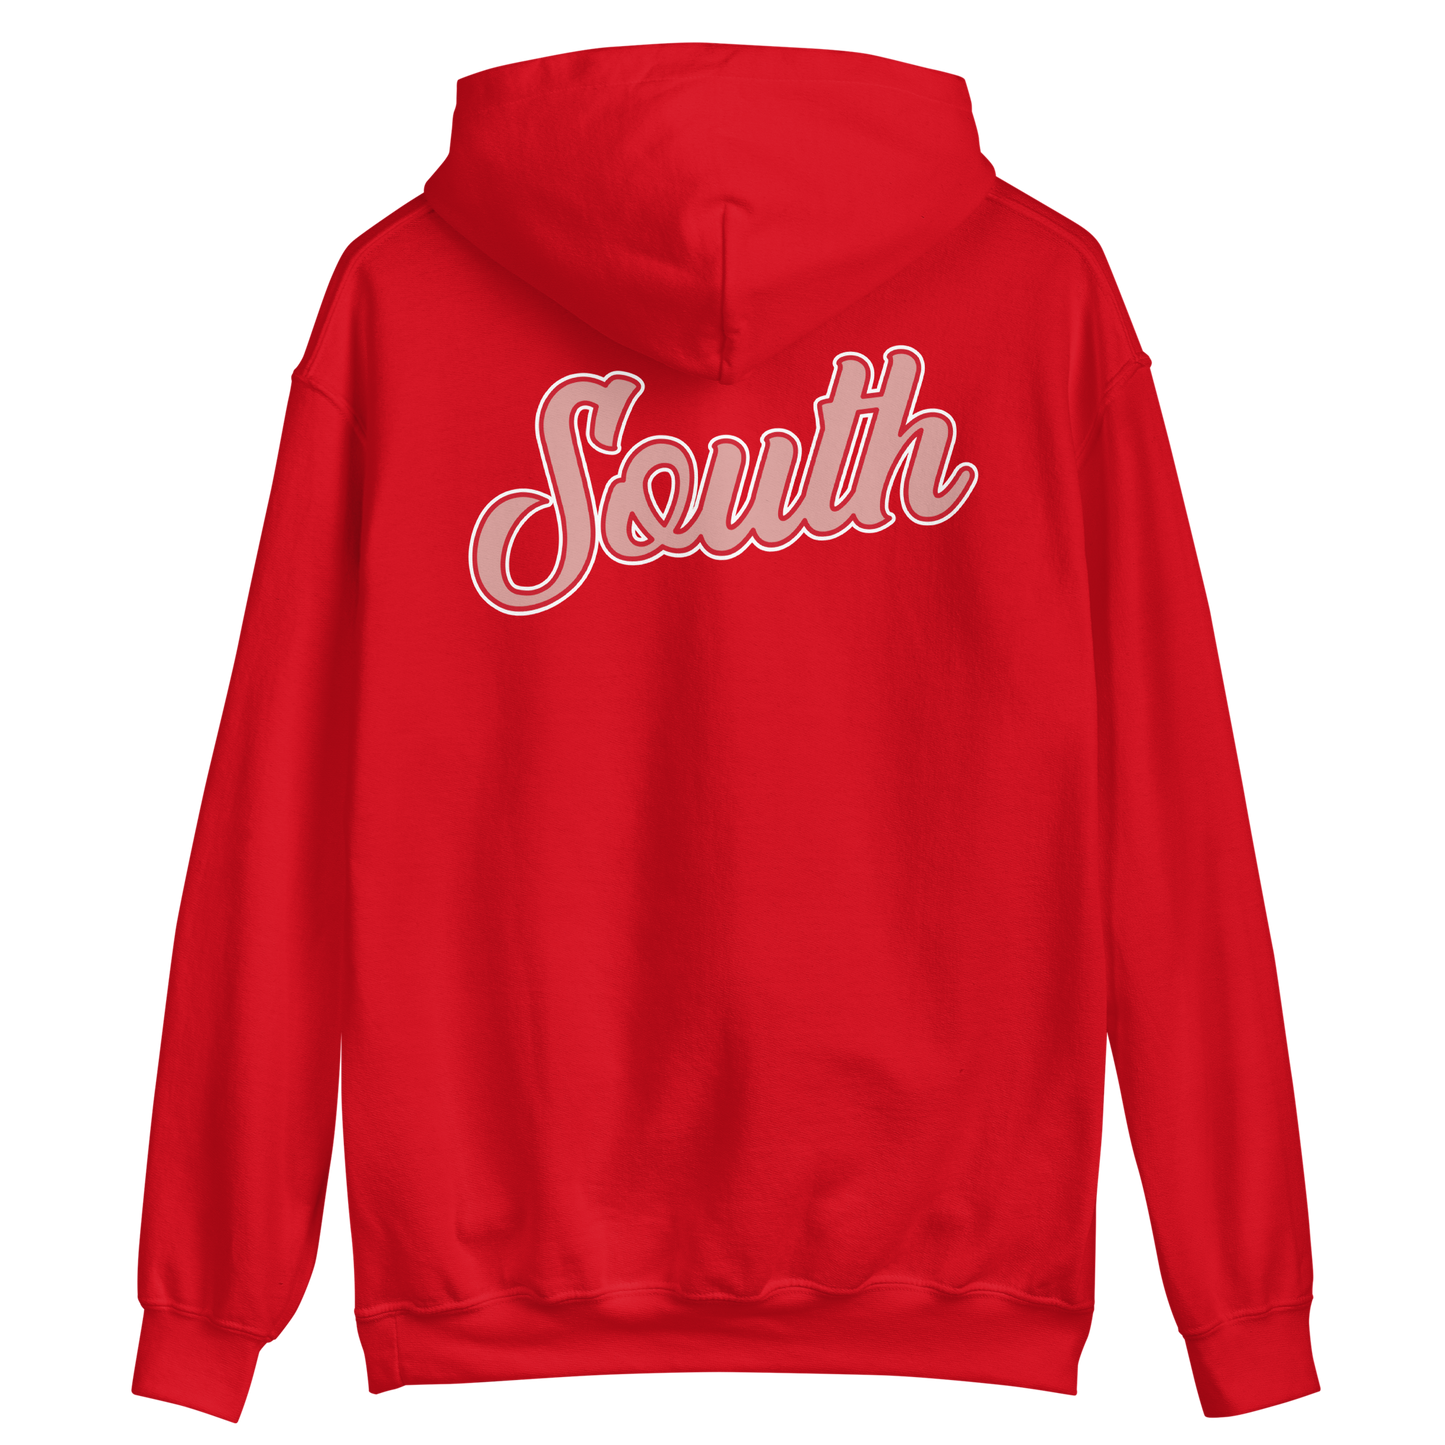 Exclusive Valentine's Day South Hoodie - Red